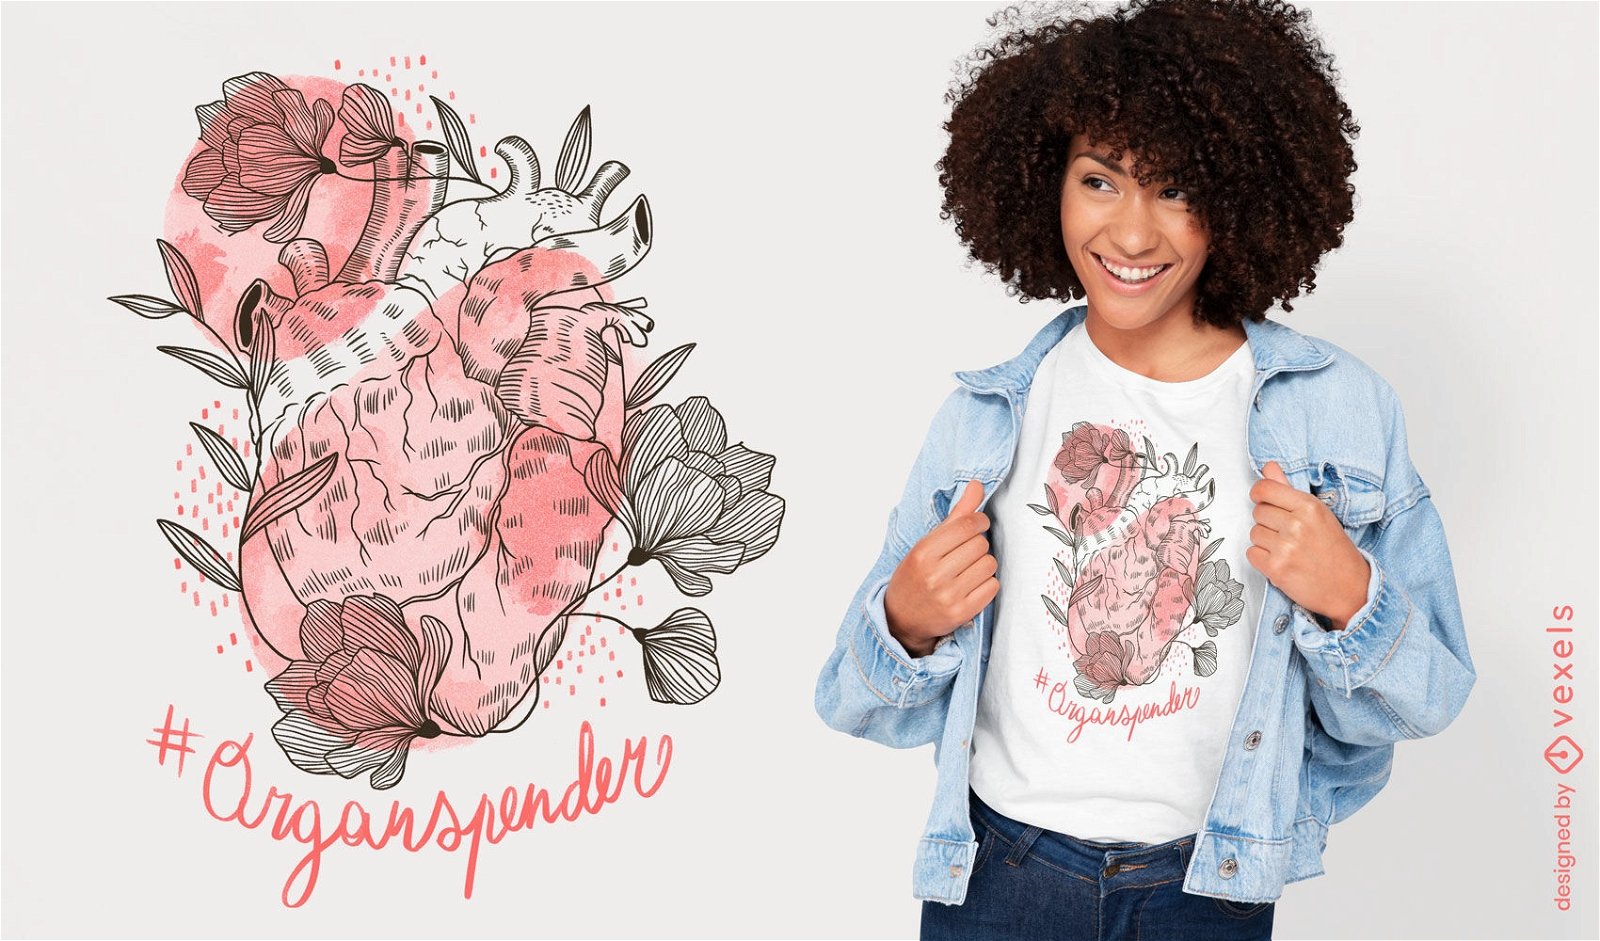 Heart and flowers nature t-shirt design